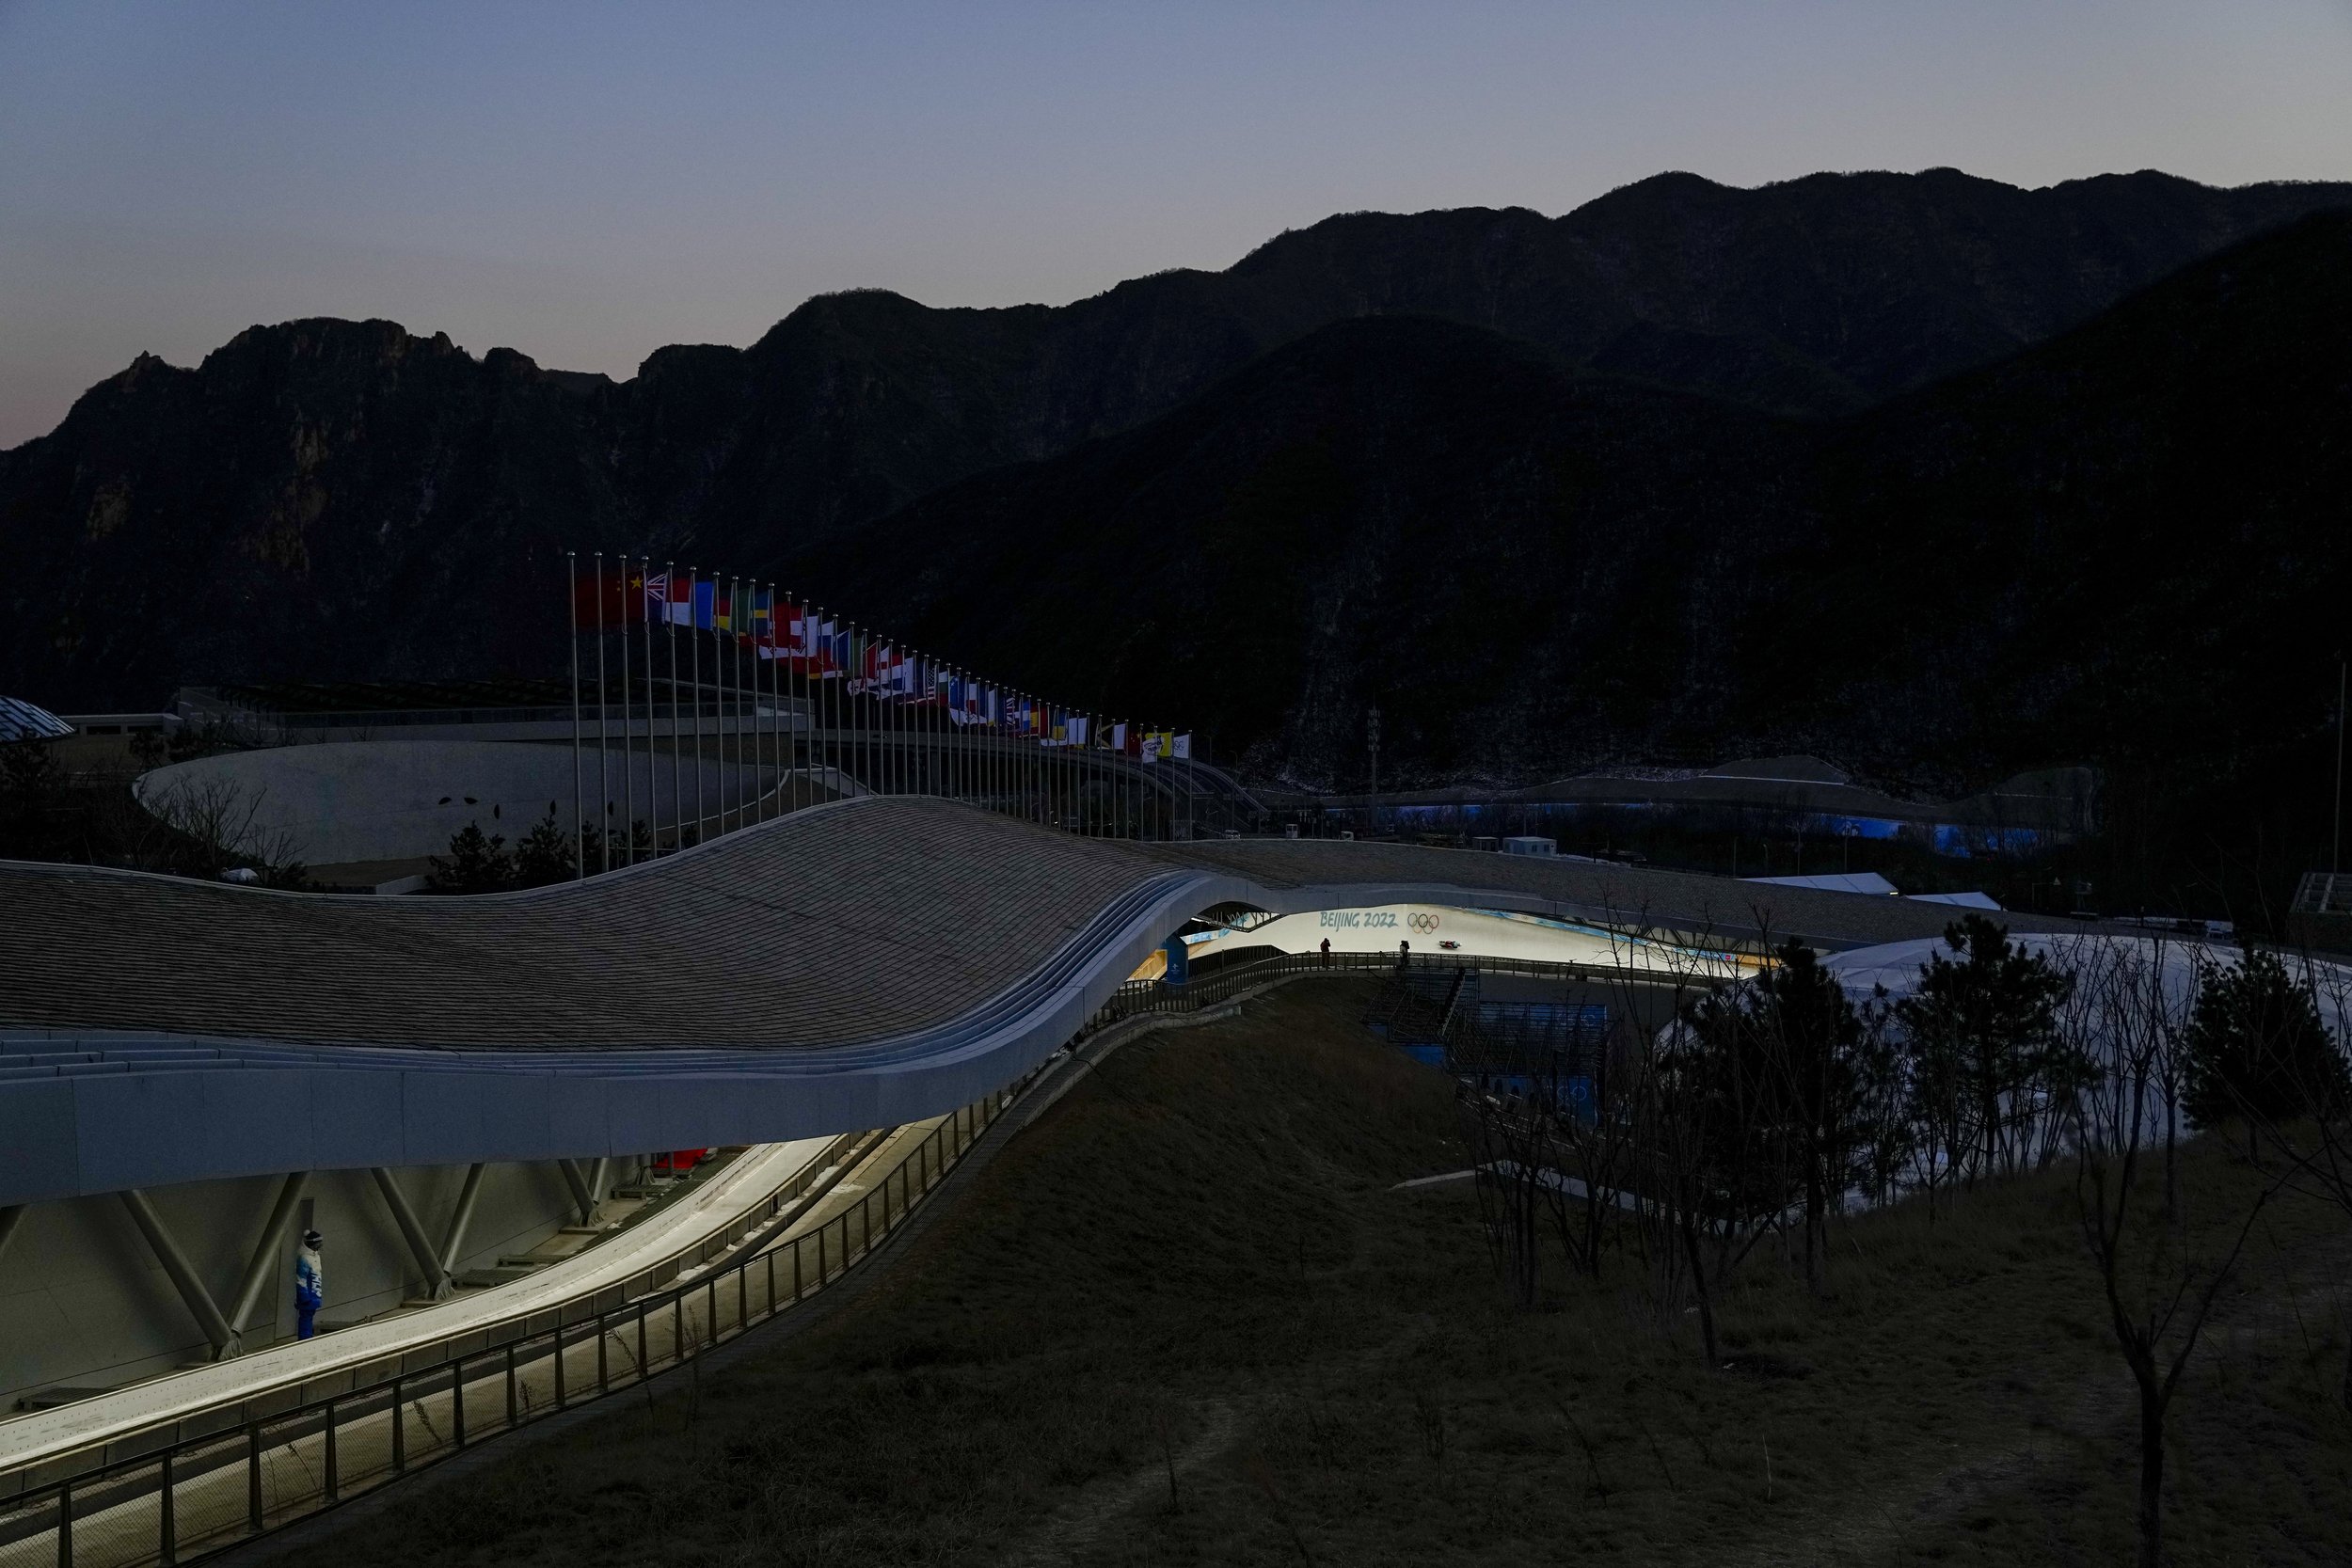  Aileen Frisch, of South Korea, slides during a luge women's training run at the 2022 Winter Olympics, Saturday, Feb. 5, 2022, in the Yanqing district of Beijing. (AP Photo/Pavel Golovkin) 